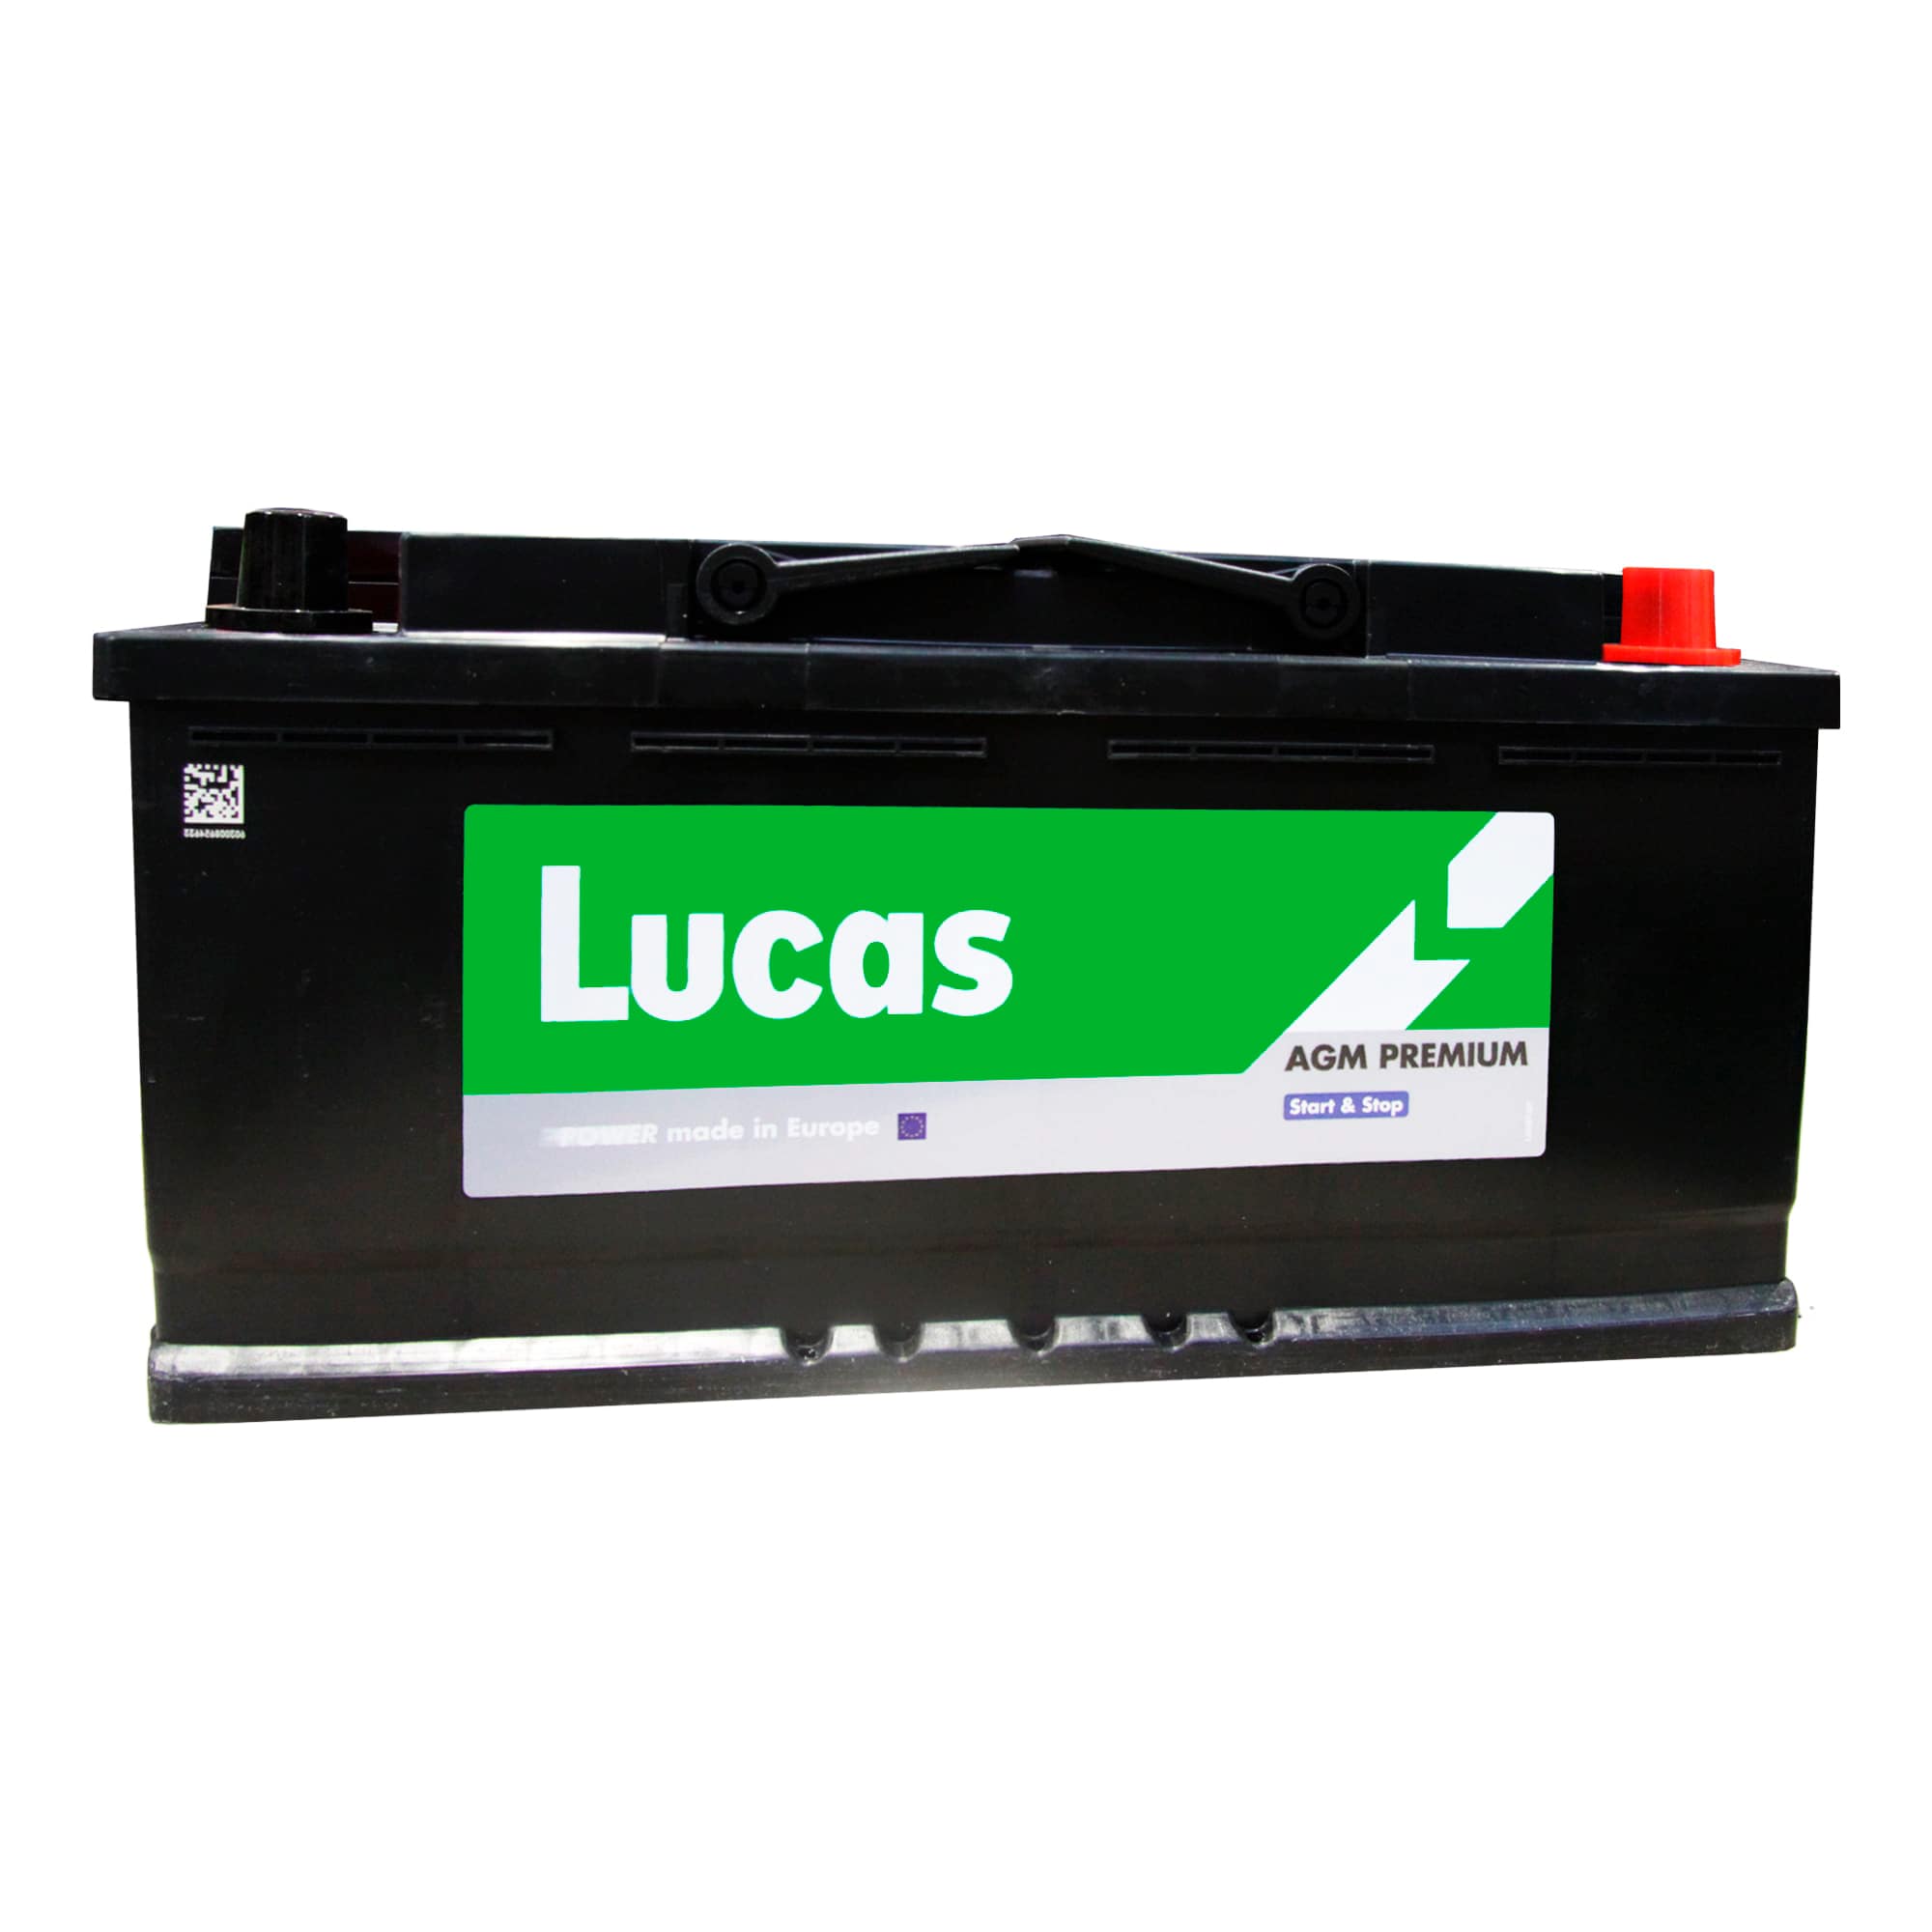 Аккумулятор Lucas (Batteries manufactured by Exide in Spain) 6CT-105Ah (-/+) AGM (LBAGM007A)